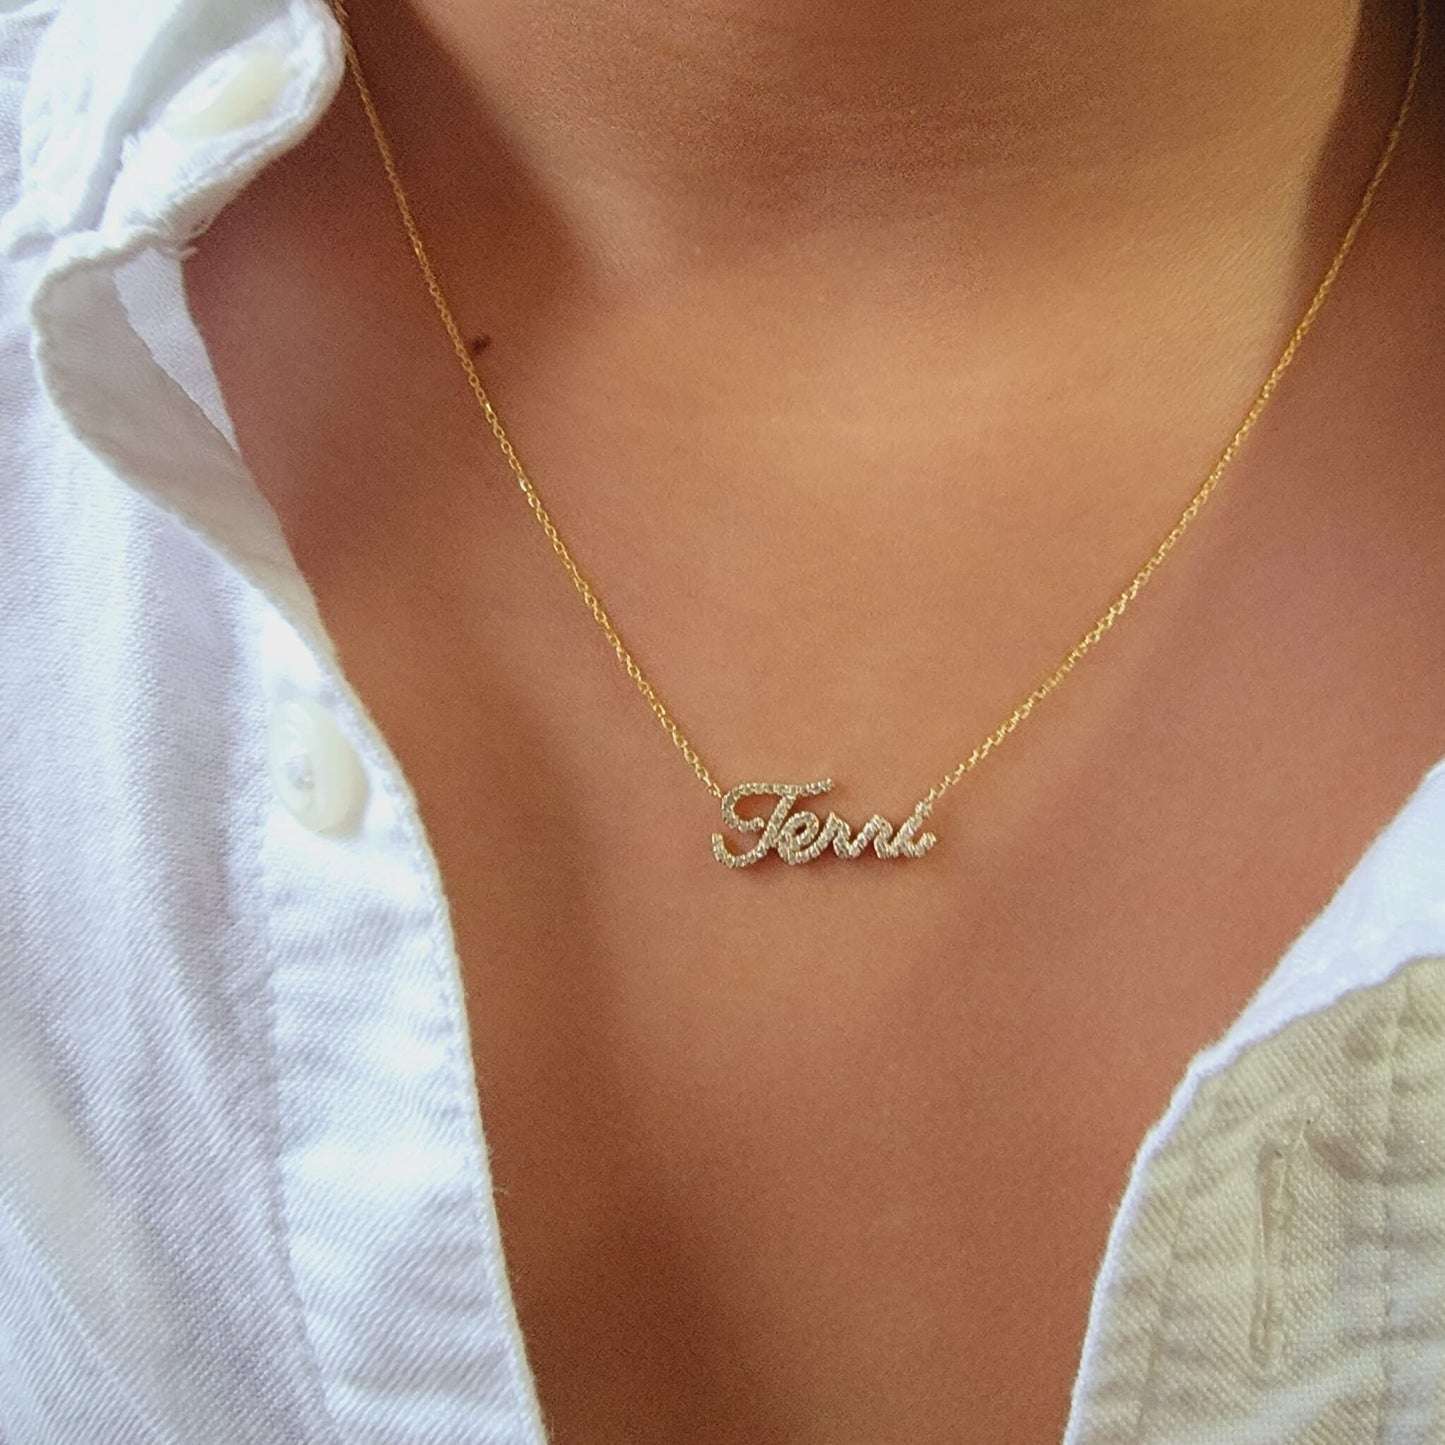 Diamond Name Necklace, 14k Personalized Dainty Script Name Necklace, Personalized Diamond Letter Necklace, Lowercase Name Necklace, Gift